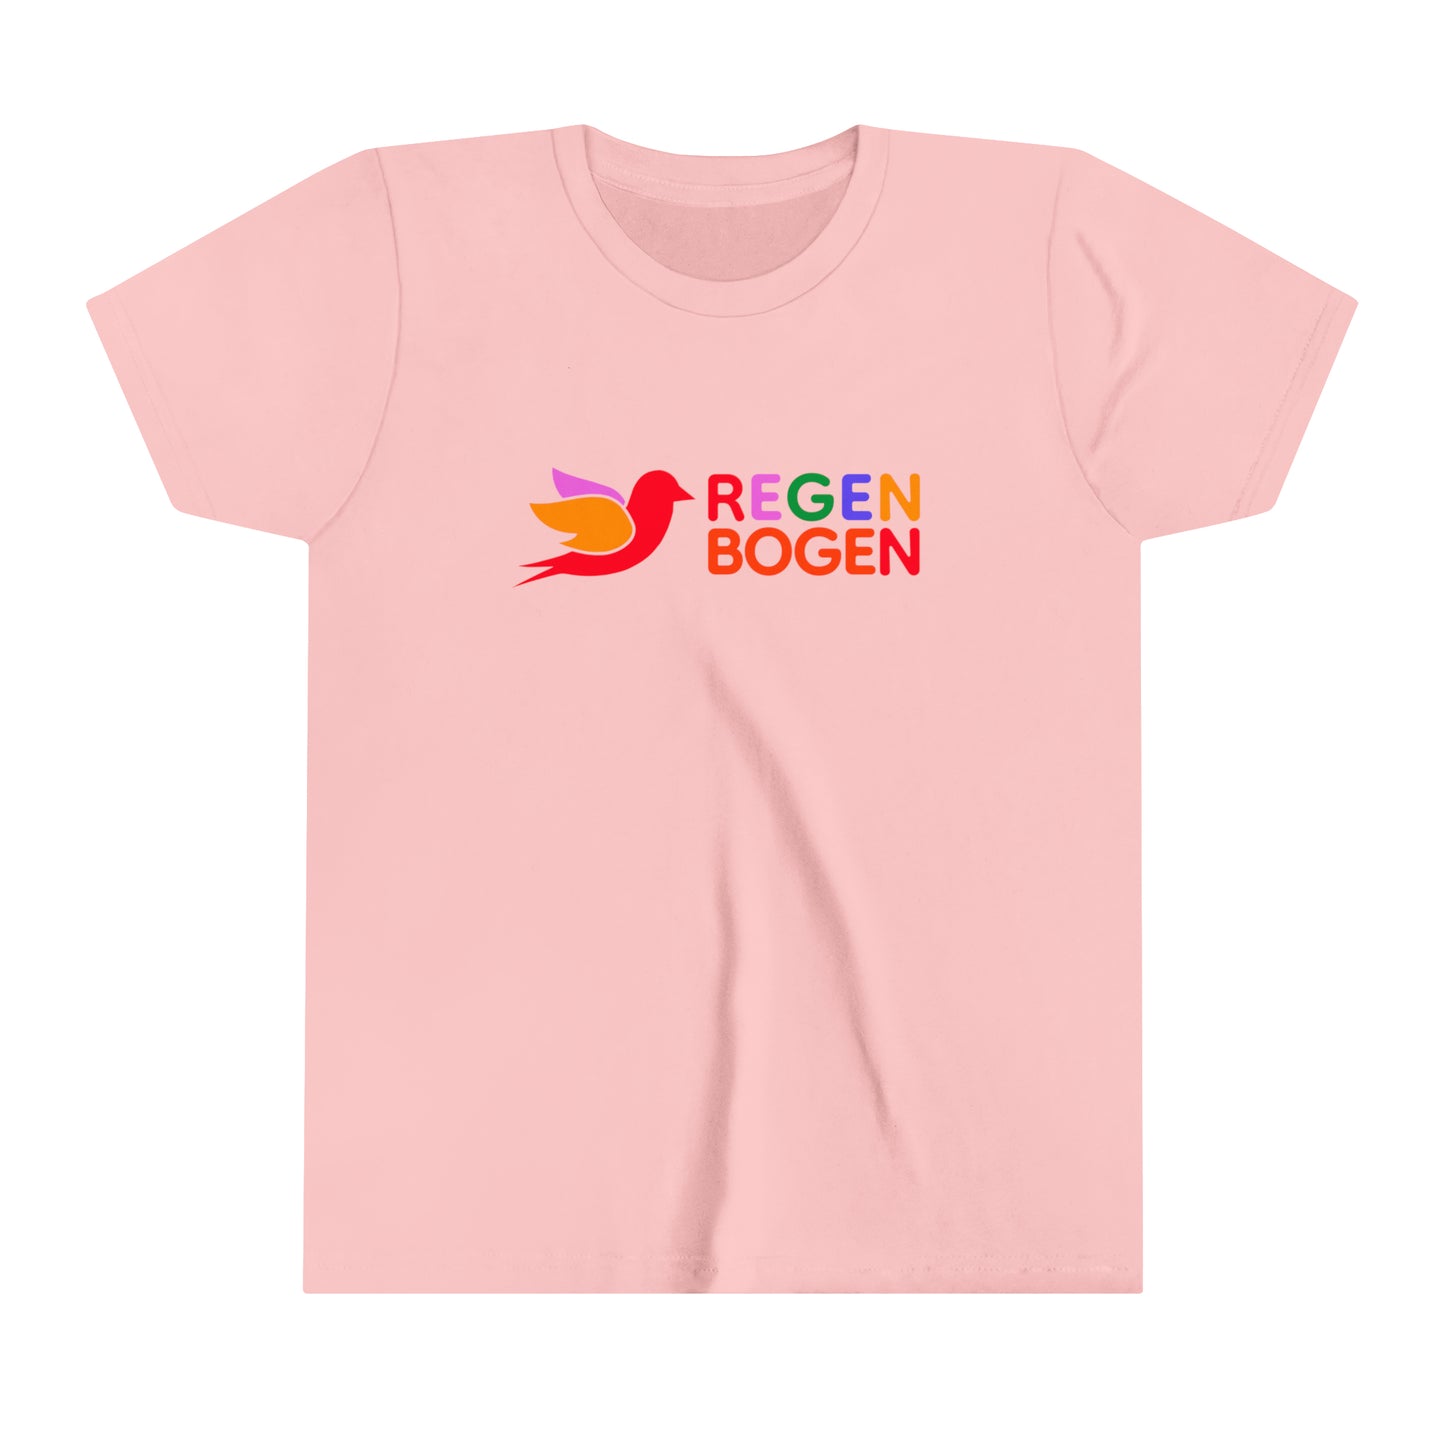 Youth Short Sleeve Tee (11 colors)